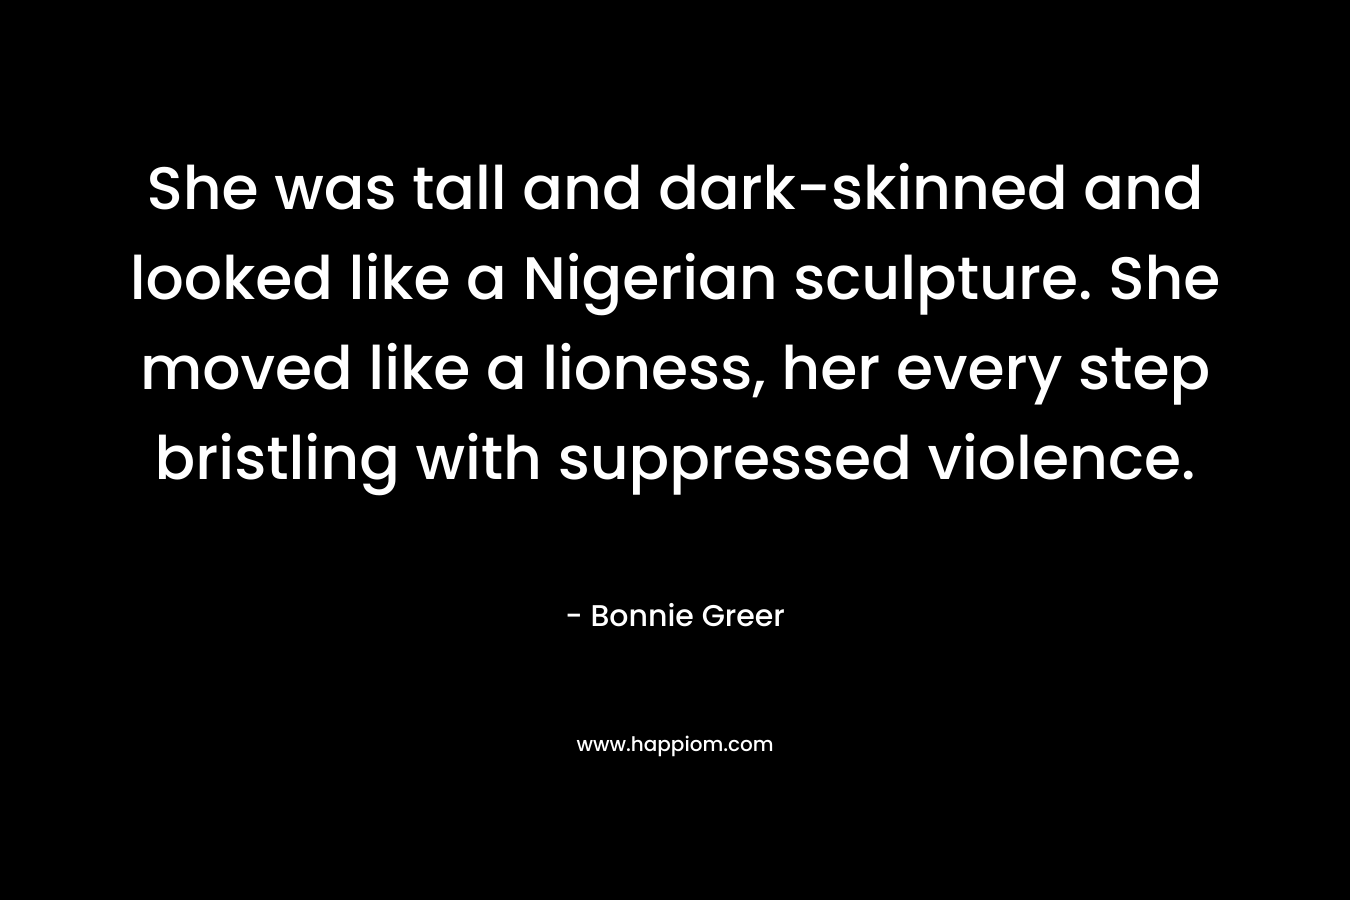 She was tall and dark-skinned and looked like a Nigerian sculpture. She moved like a lioness, her every step bristling with suppressed violence. – Bonnie Greer